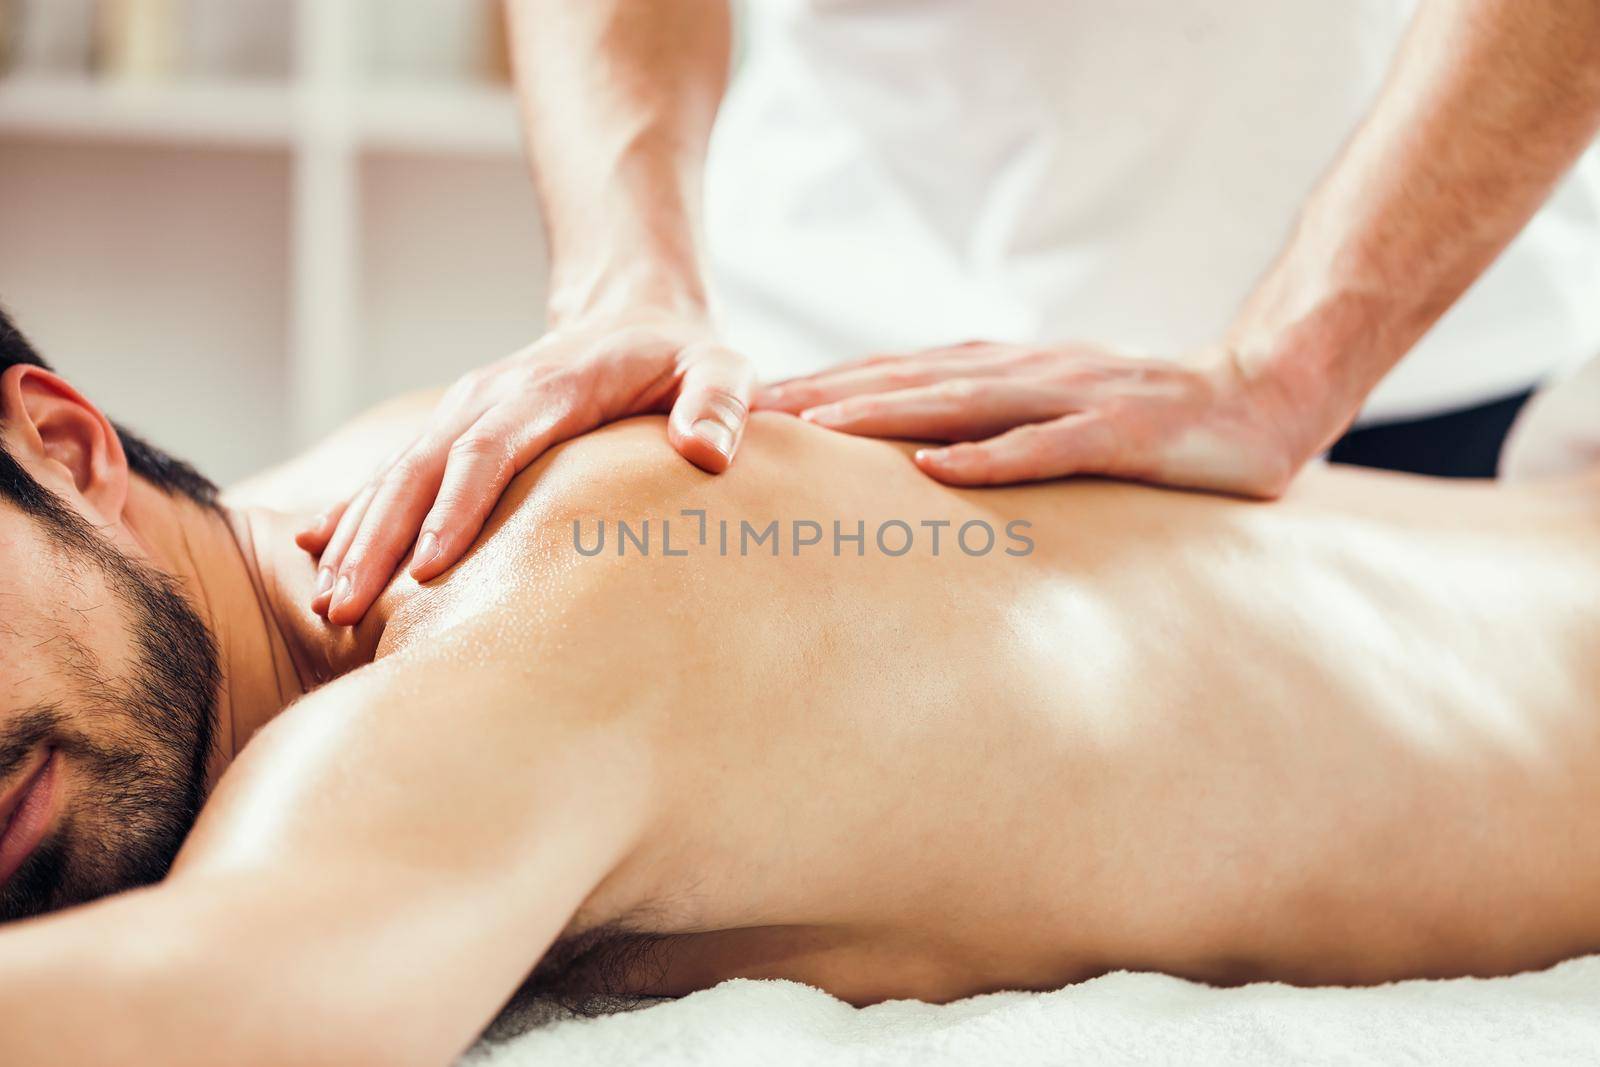 Young man is enjoying massage on spa treatment. Professional masseur is massaging his back.